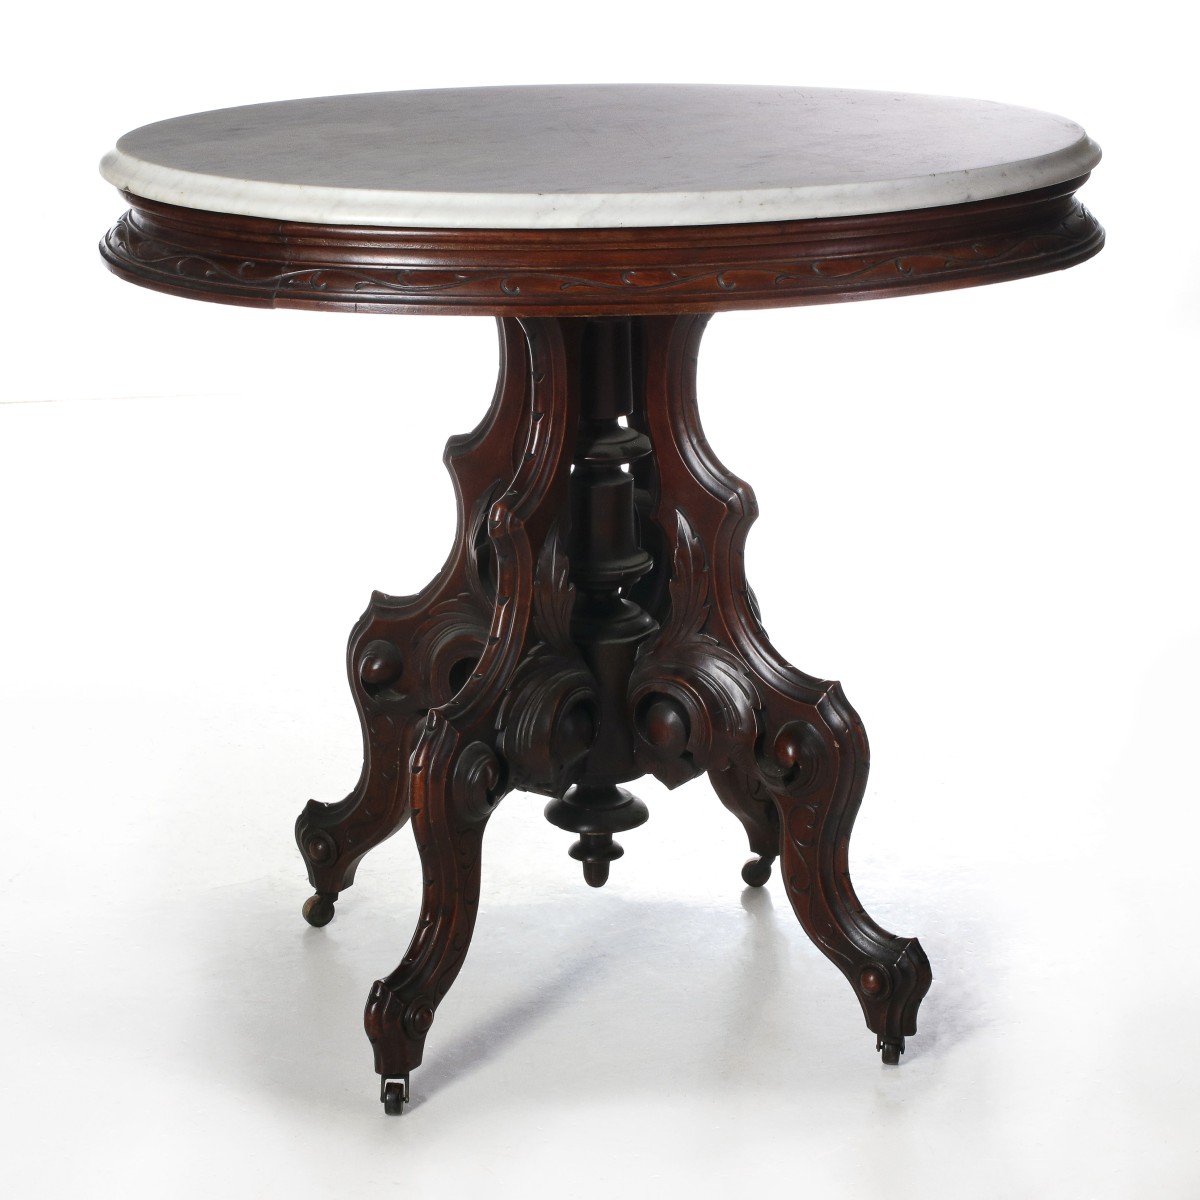 A 19TH CENTURY AMERICAN OVAL MARBLE TOP PARLOR TABLE